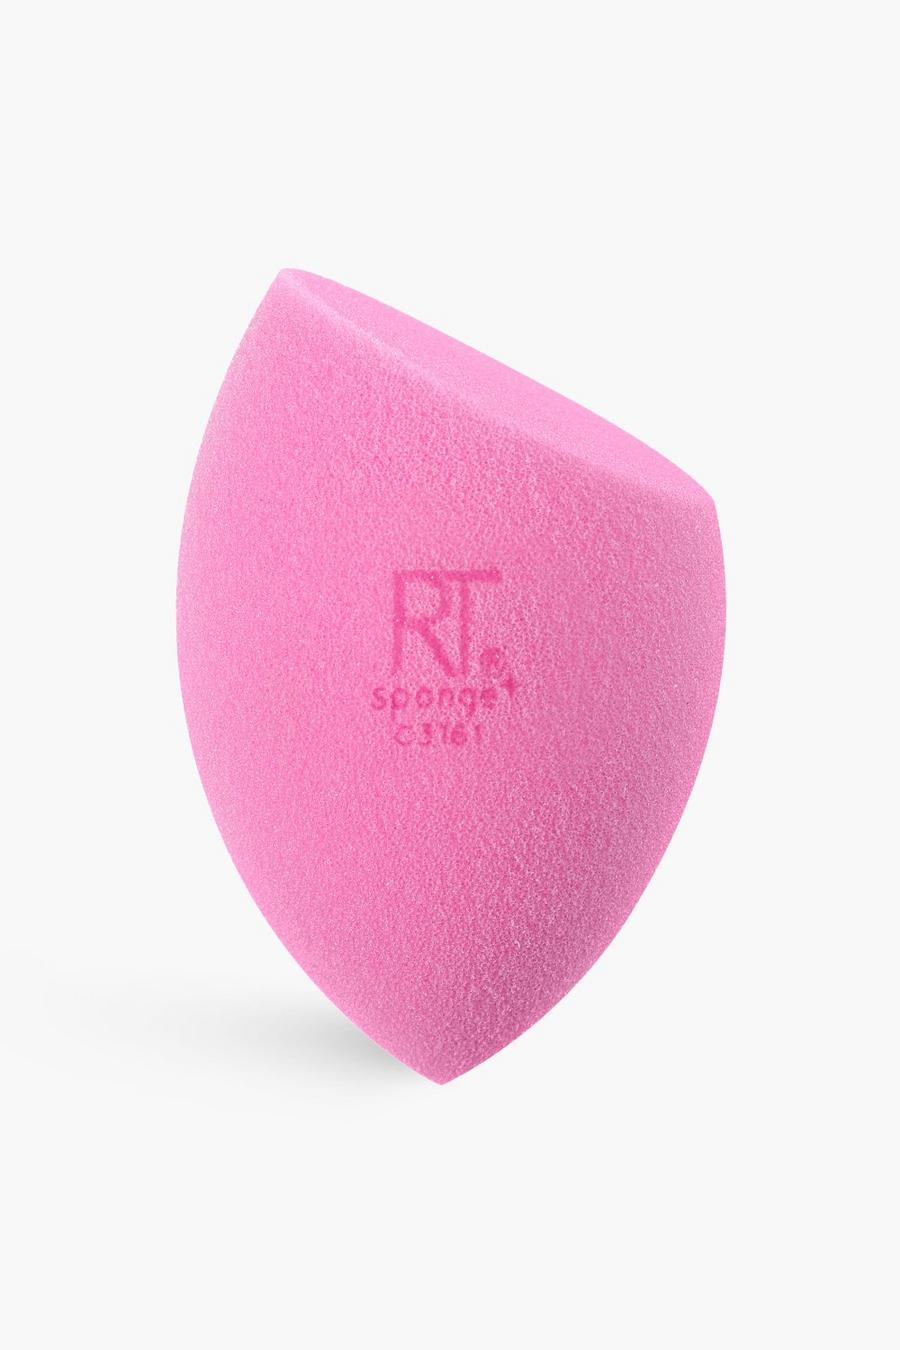 Real Techniques - Spugna multi-uso per make up Miracle Sponge, Pink rosa